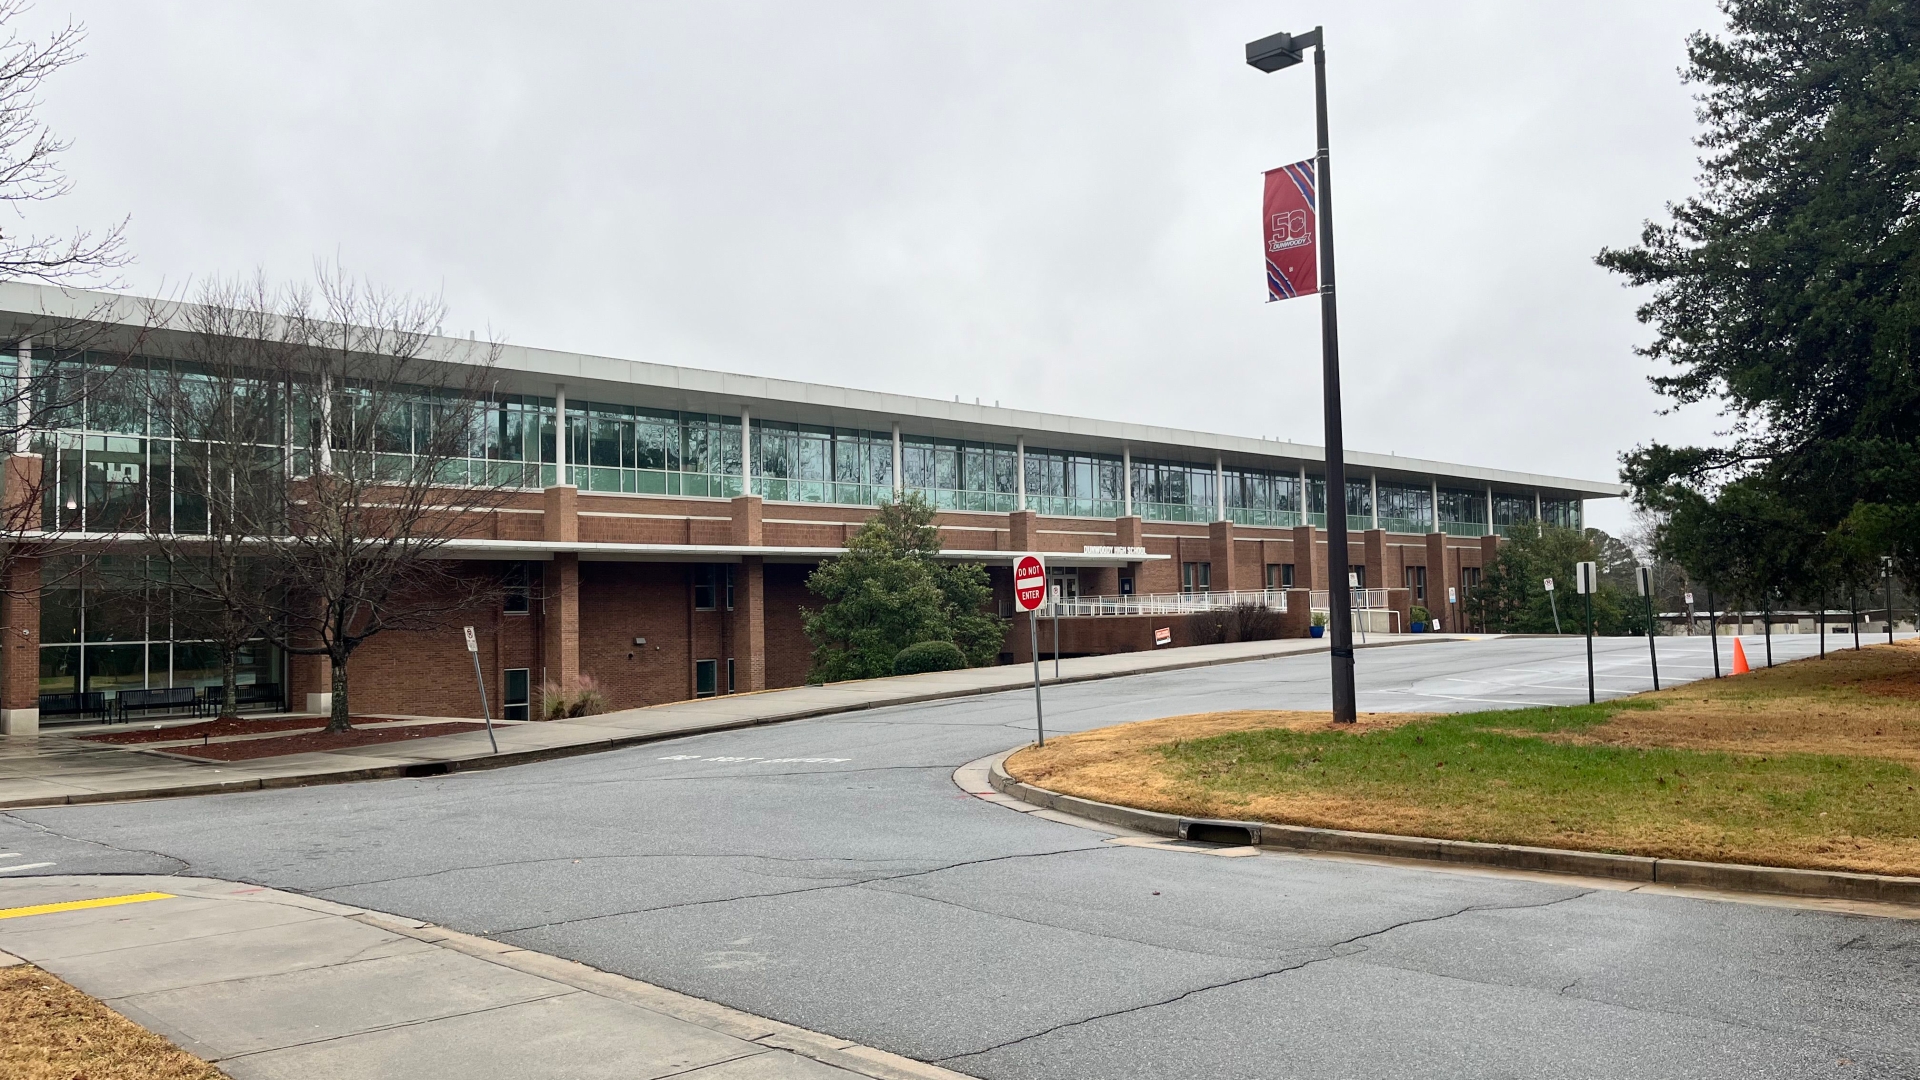 Tragedy Strikes: 15-Year-Old Girl's Death at Dunwoody High School